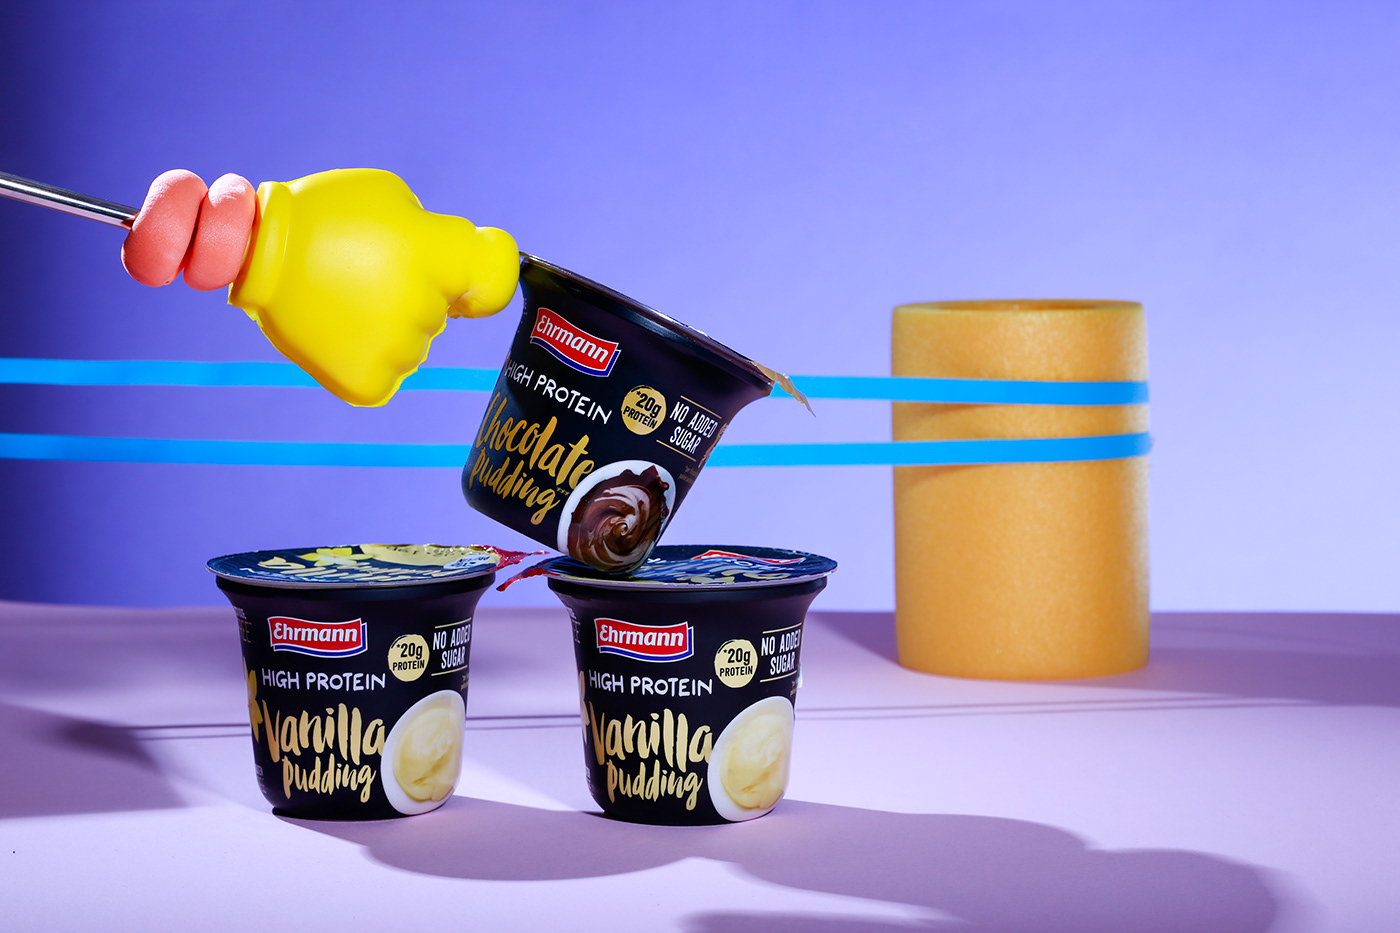 foodphotography setdesign ehrmann product drink littleworld muscles protein Fun gym